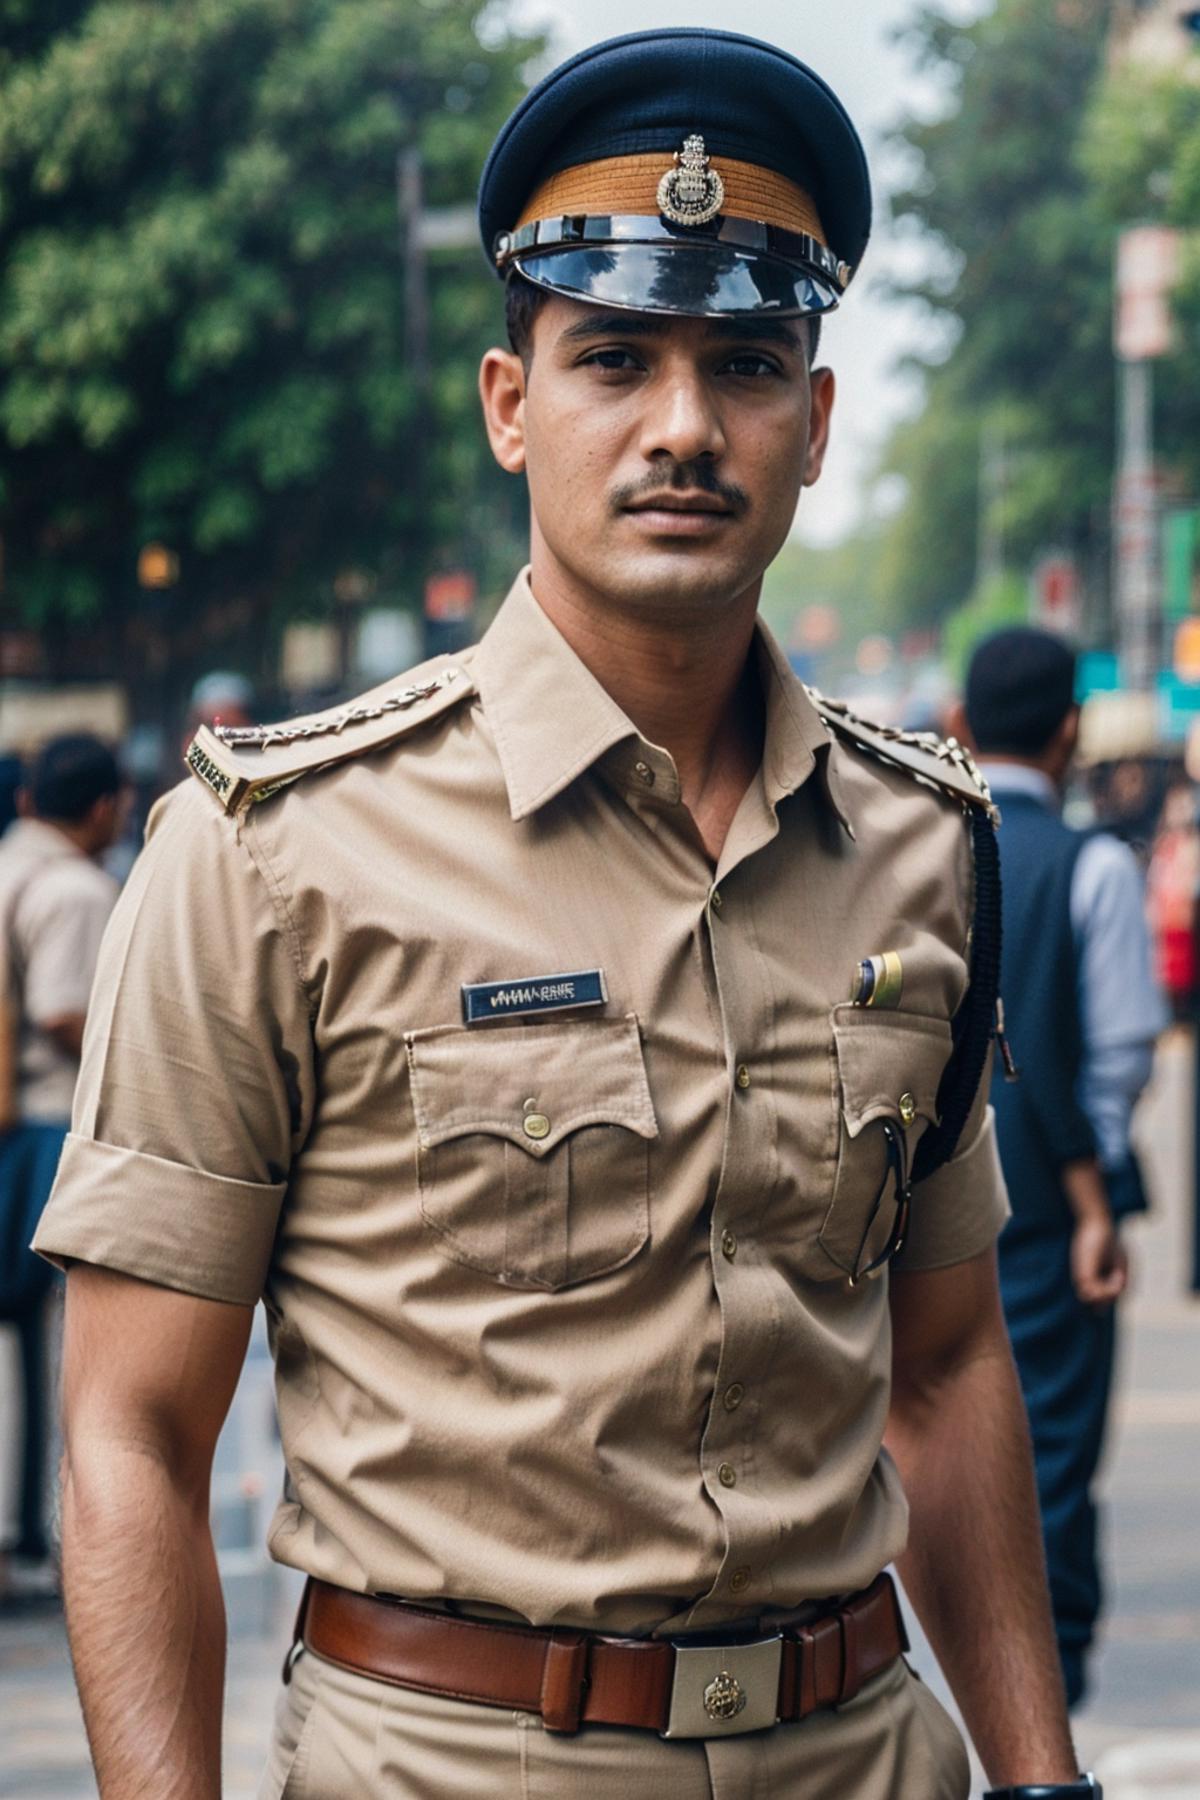 Indian Police Uniform image by Dreamer247